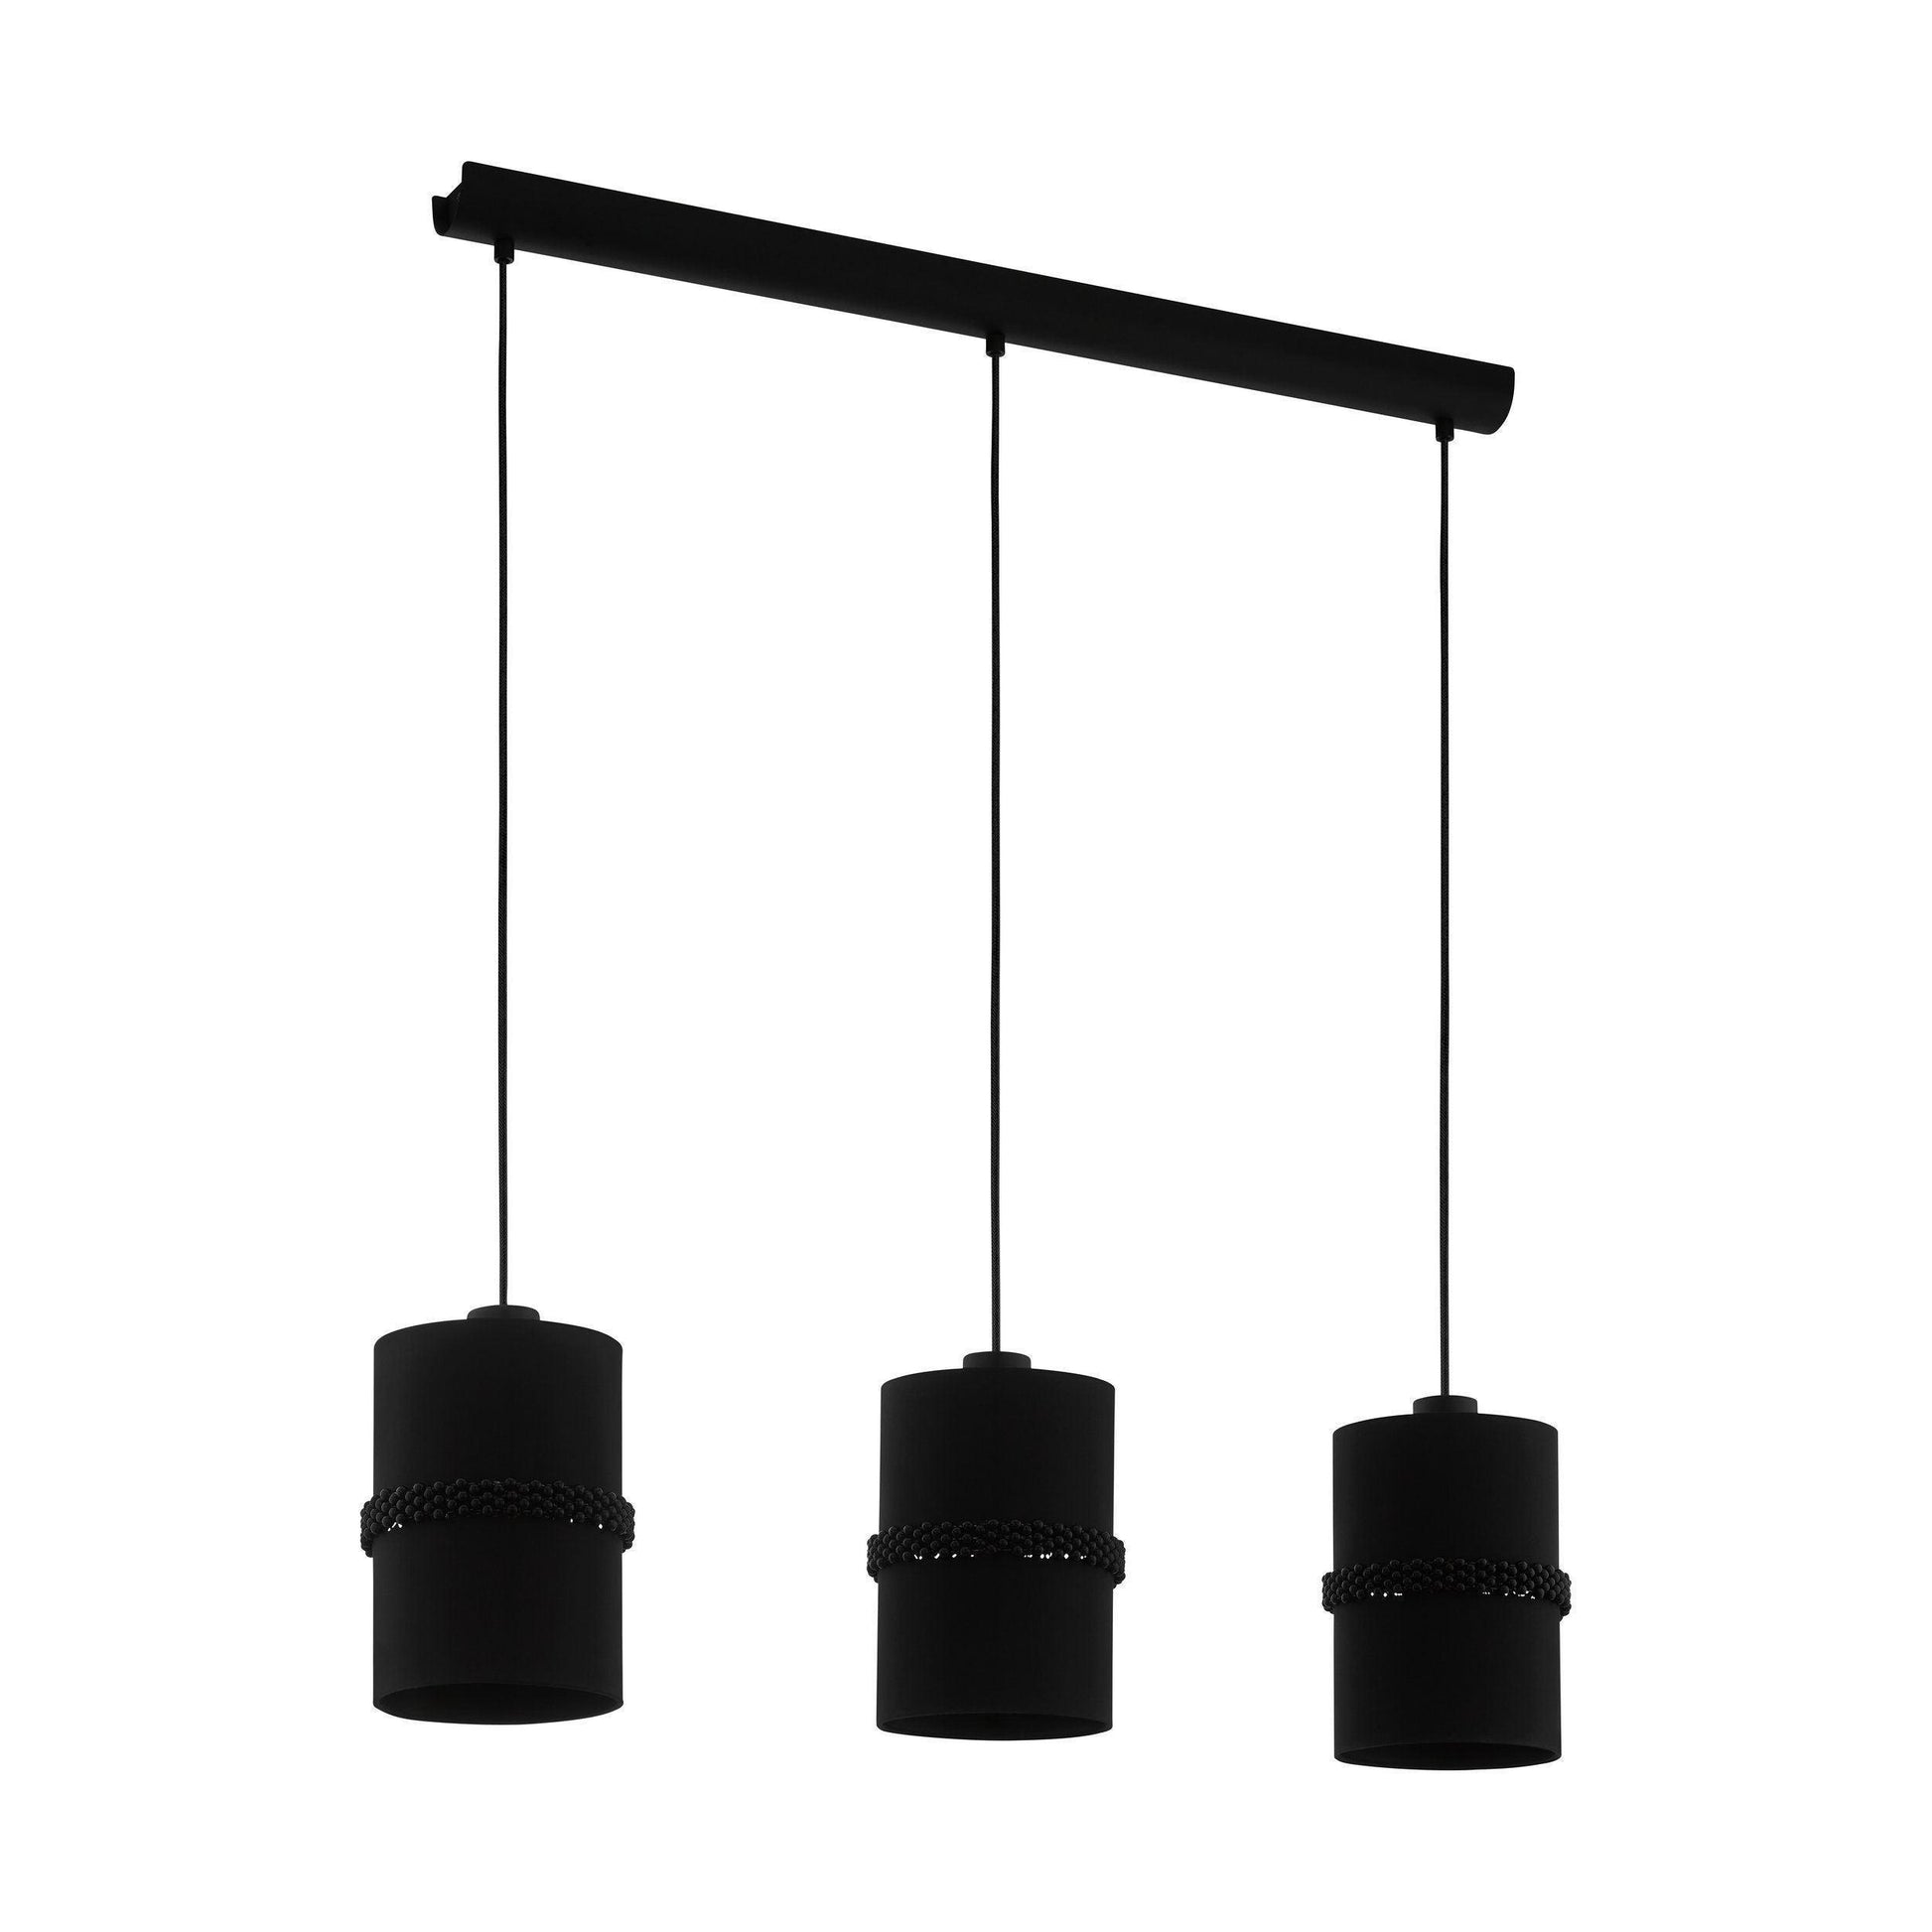 PARAGUAIO Pendant Light by The Light Library